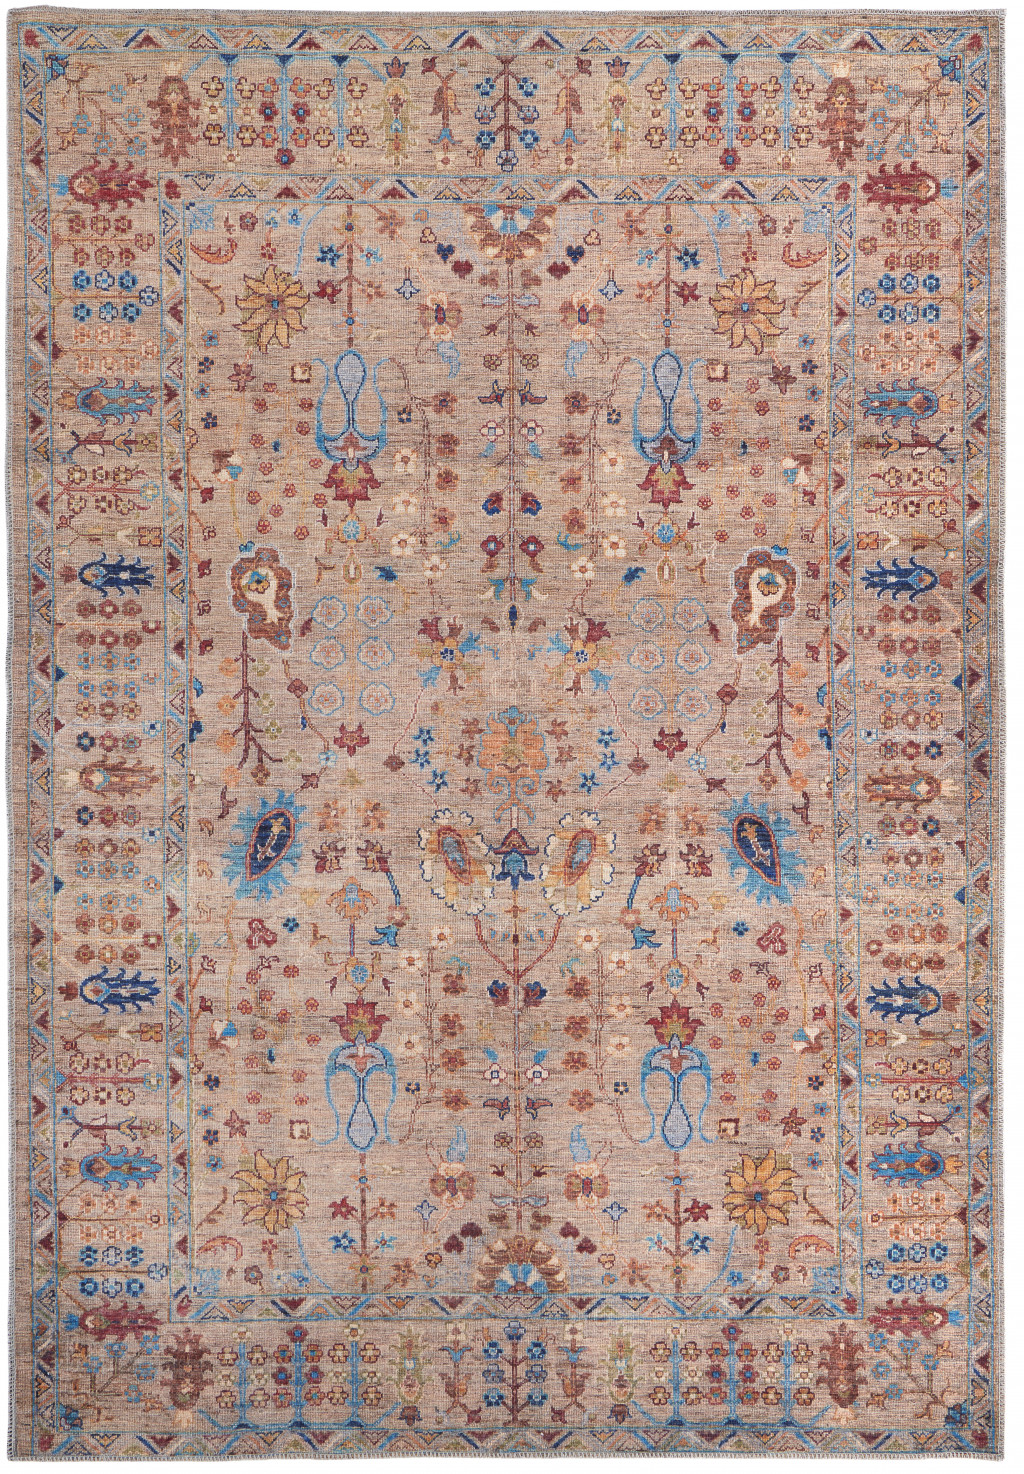 2' X 3' Tan Pink And Blue Floral Power Loom Area Rug-515167-1